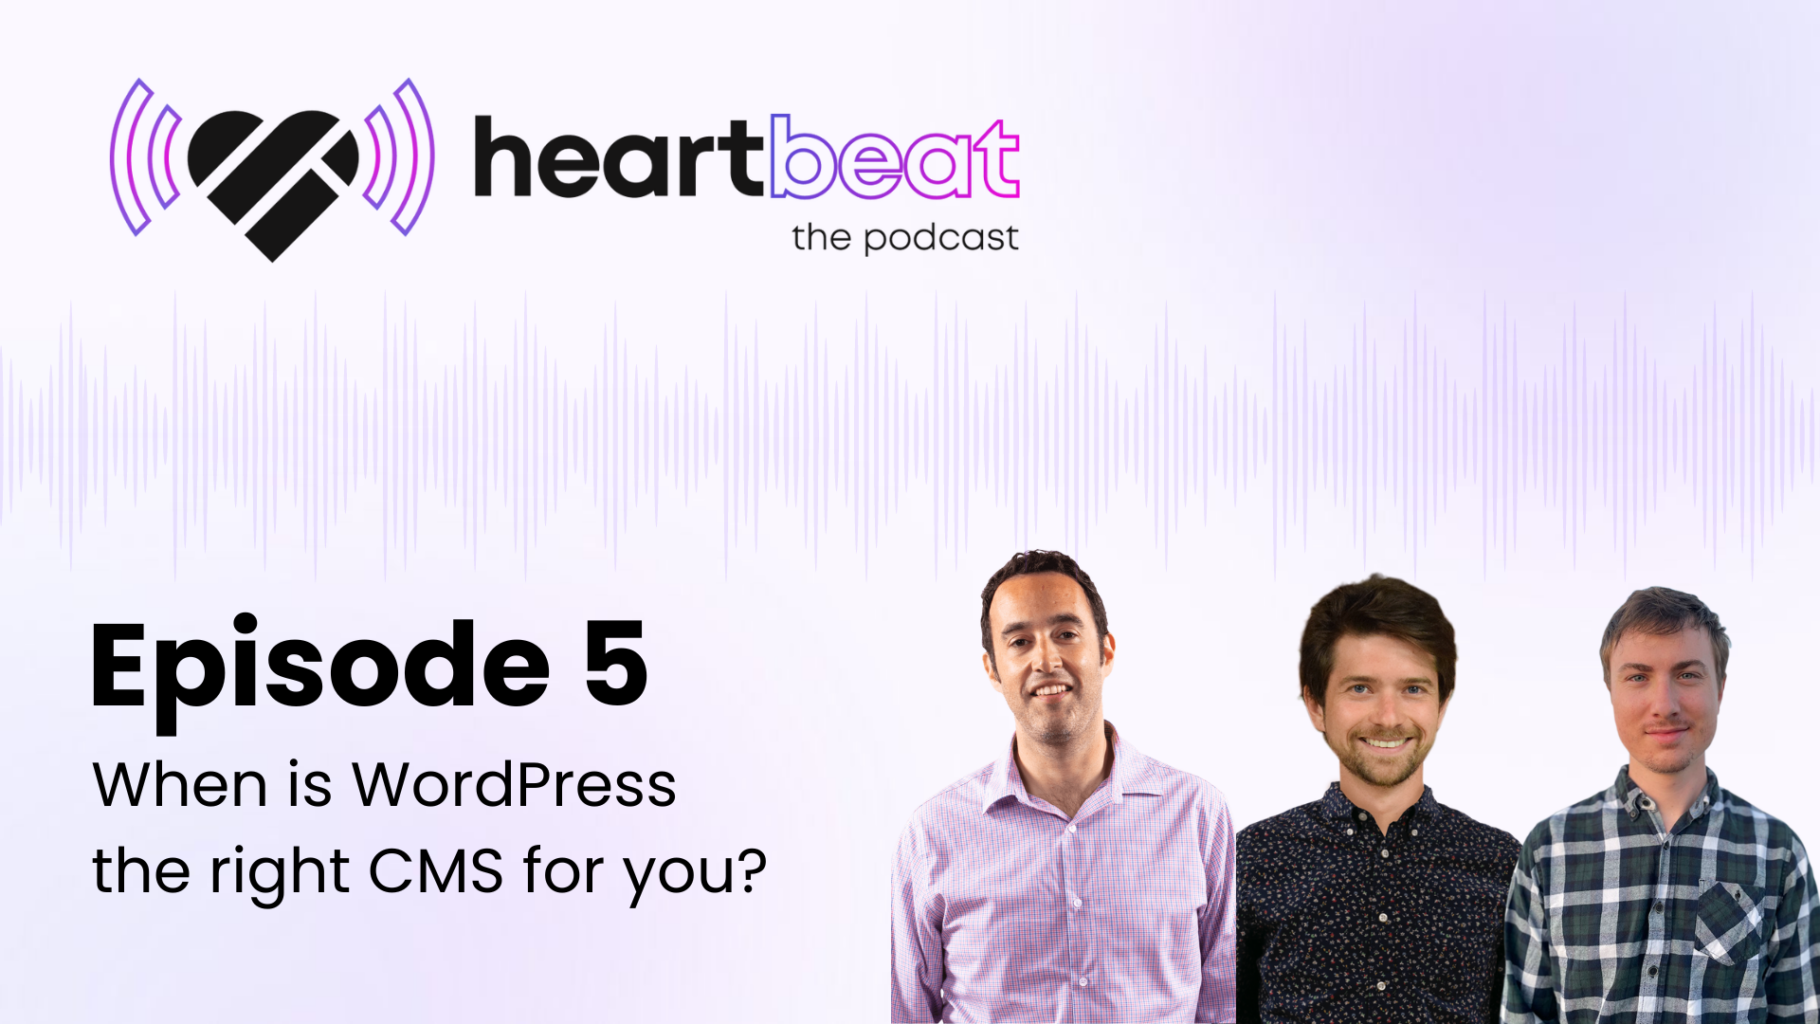 When is WordPress the right CMS for your business?